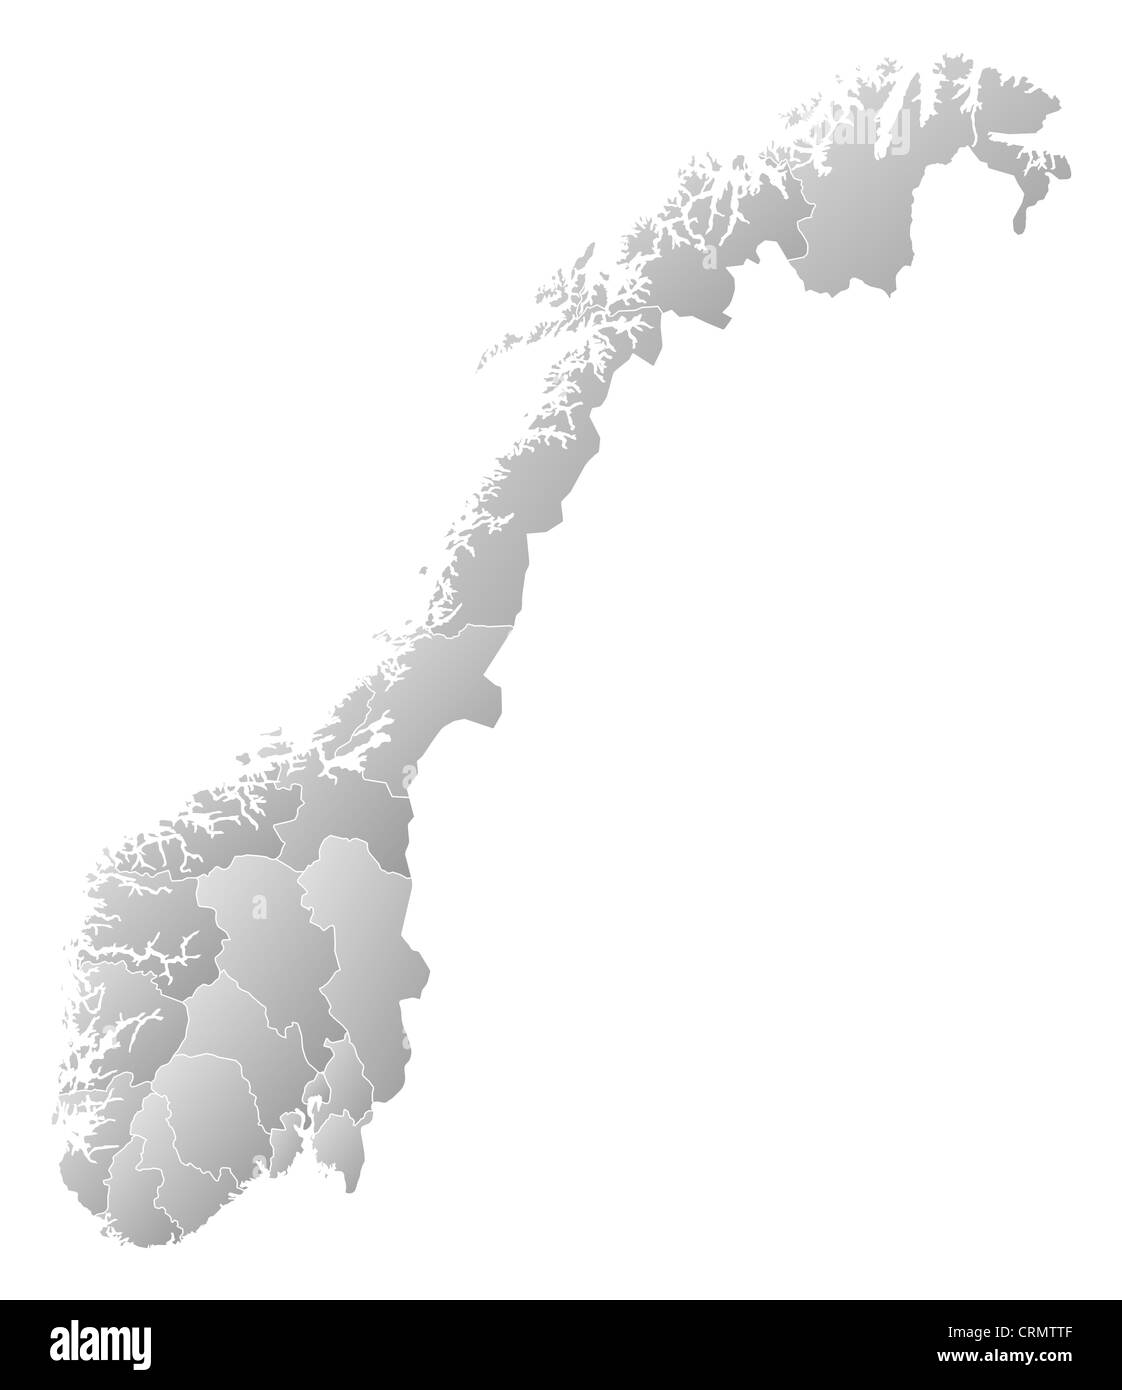 Political map of Norway with the several counties. Stock Photo